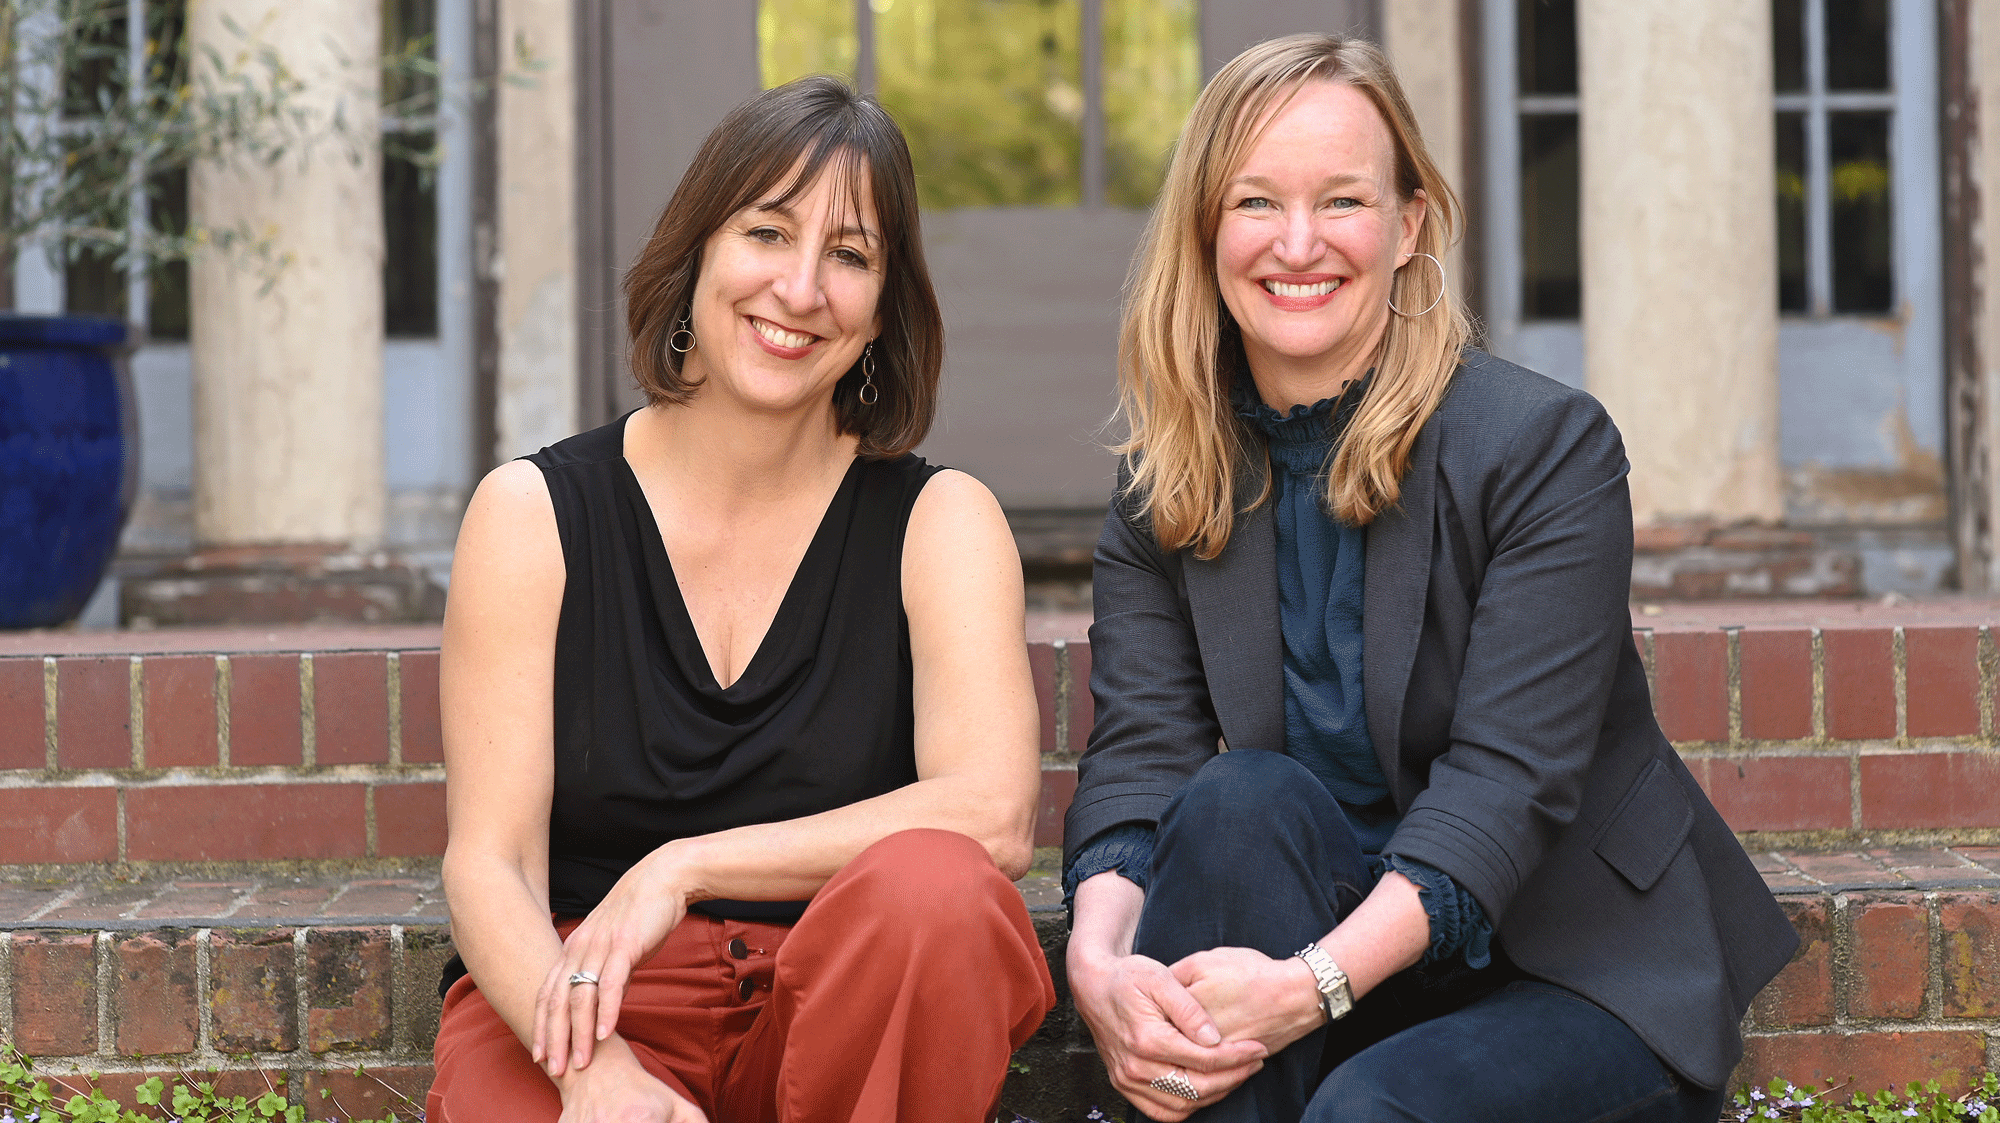 Two women sit side by side on brick steps, smiling